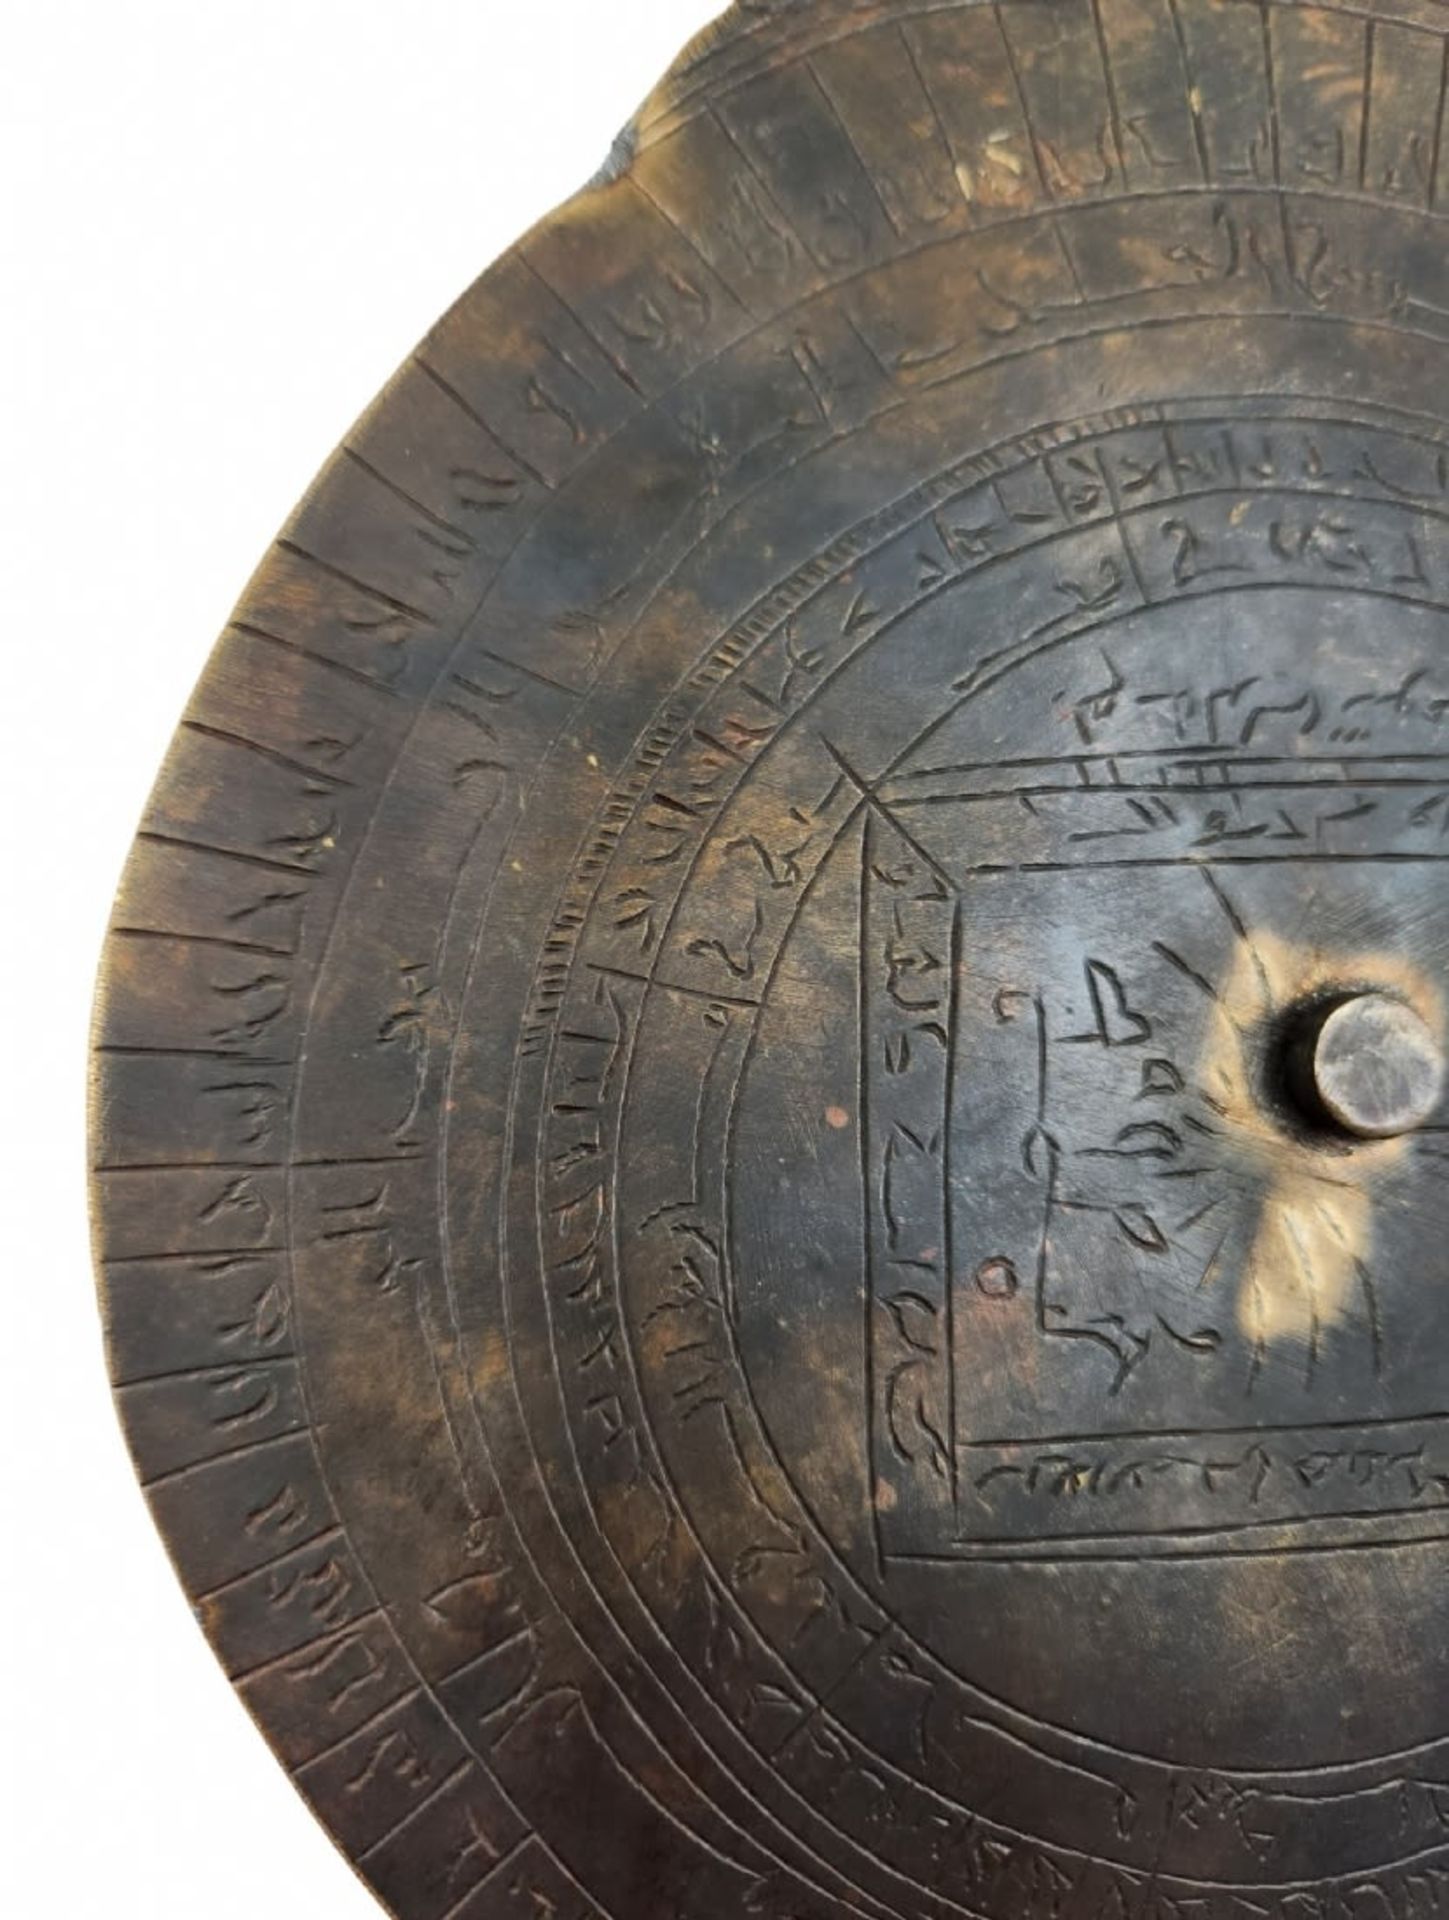 Astrolabe - Islamic Persian, made of brass, decorated with calligraphic engravings, end of the - Image 5 of 6